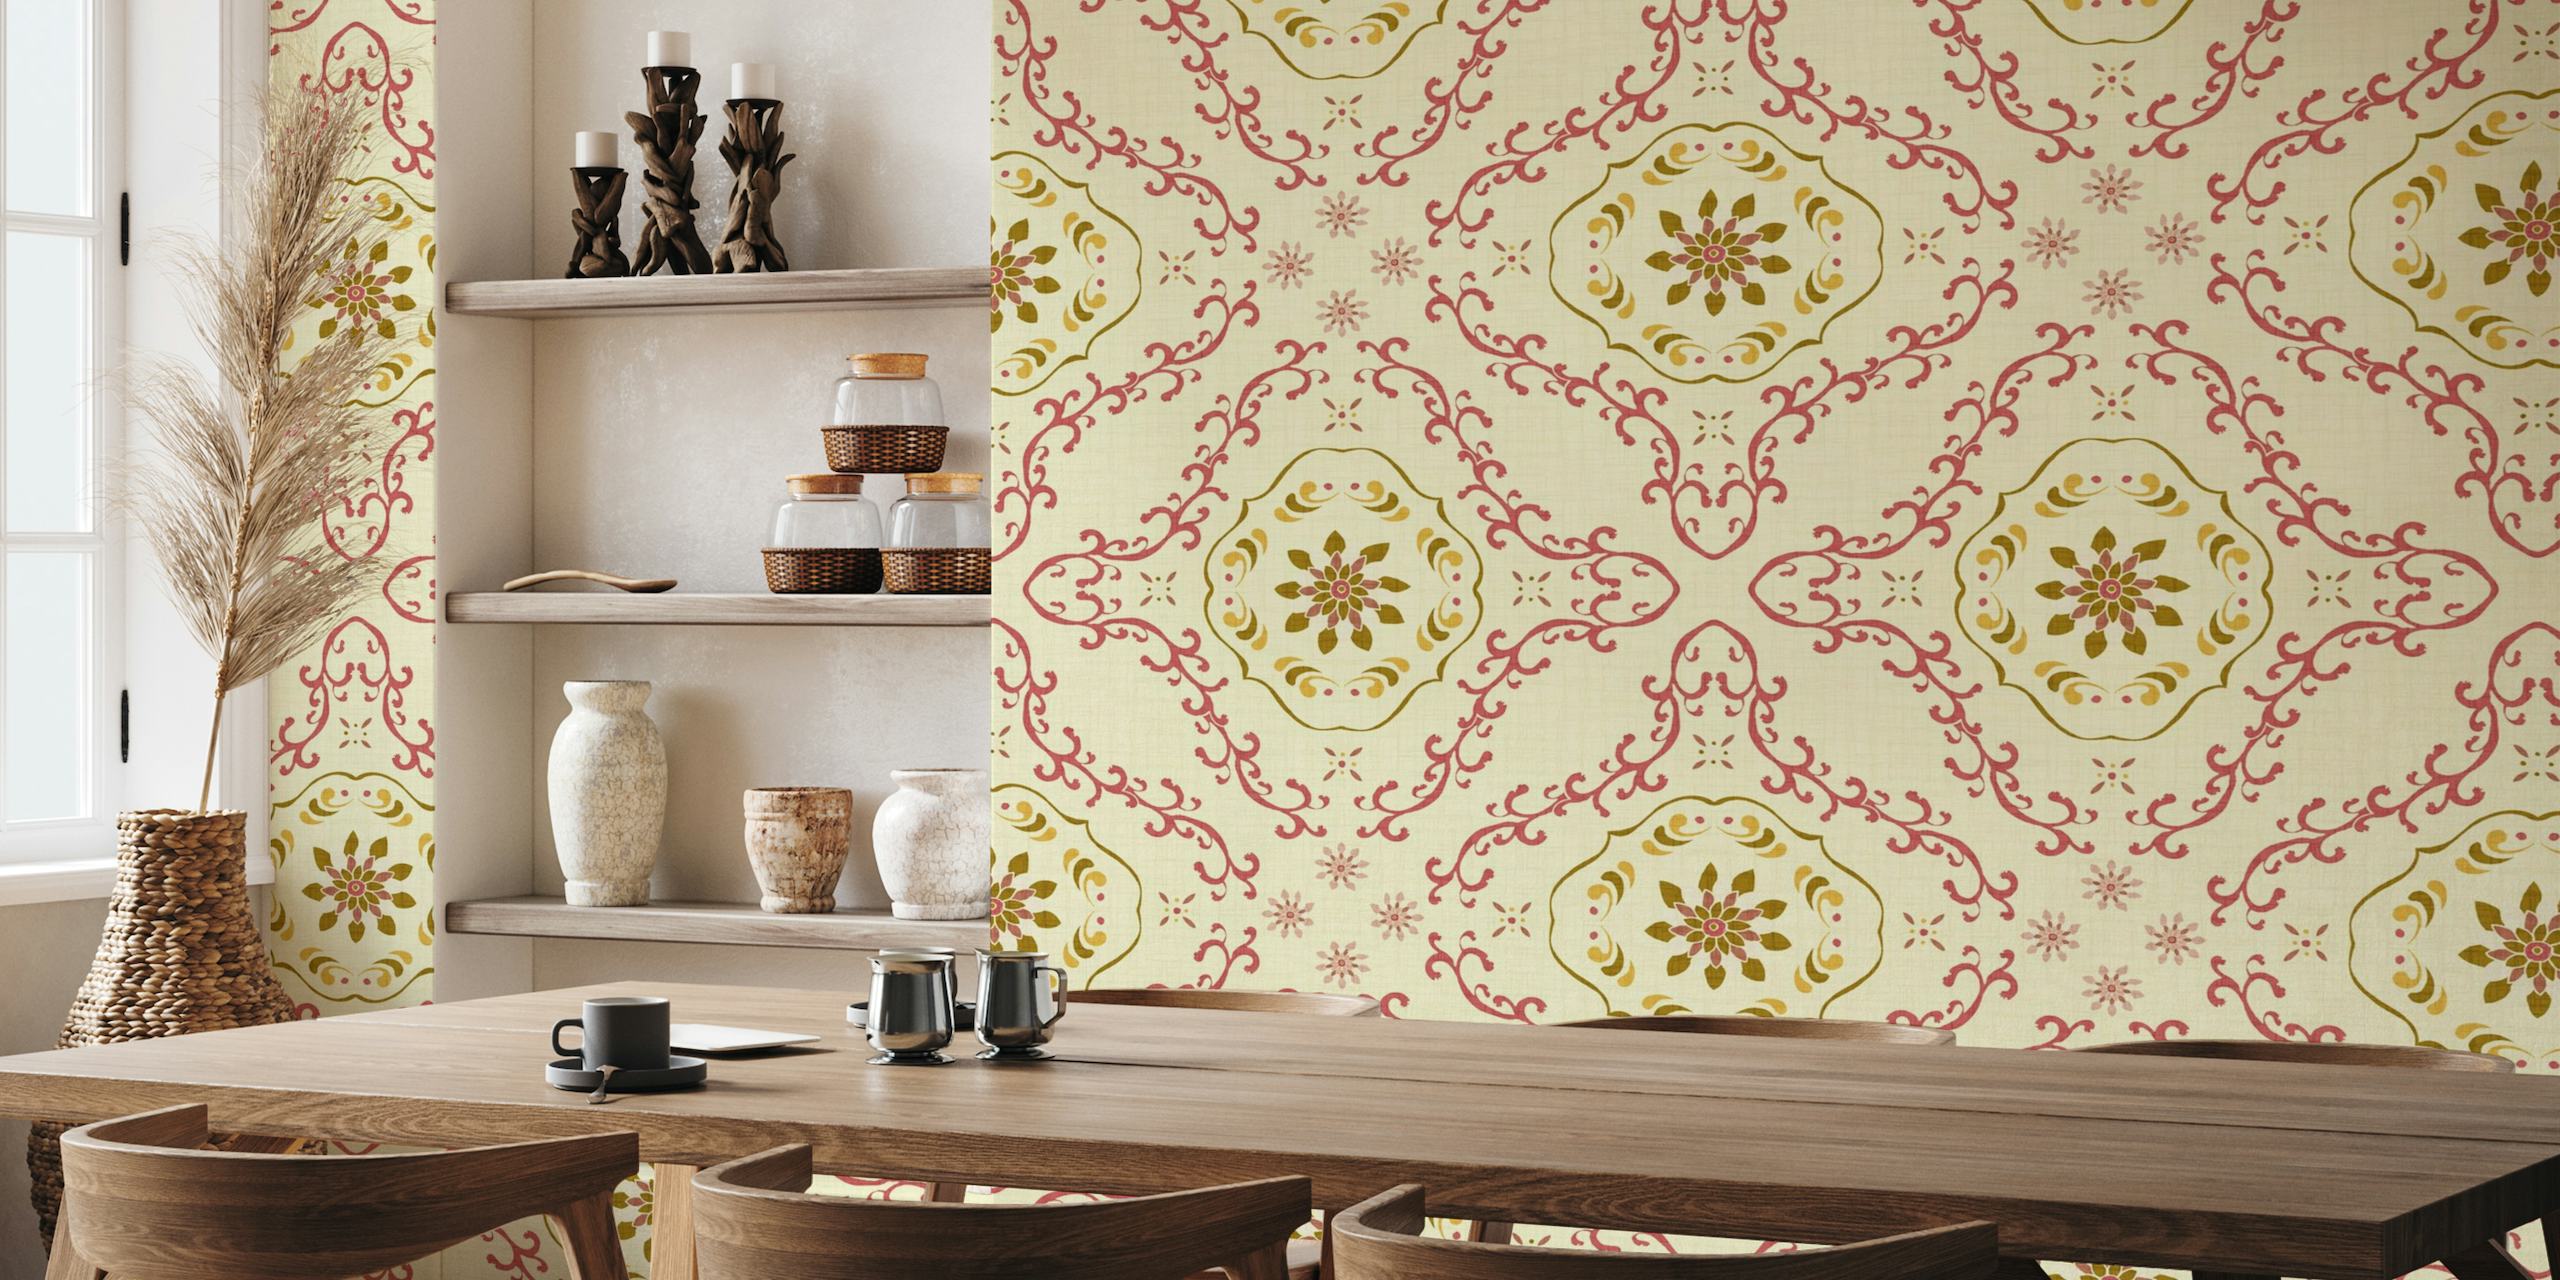 Vintage-inspired wall mural of floral tiles in pink and gold tones with olive accents on a cream background